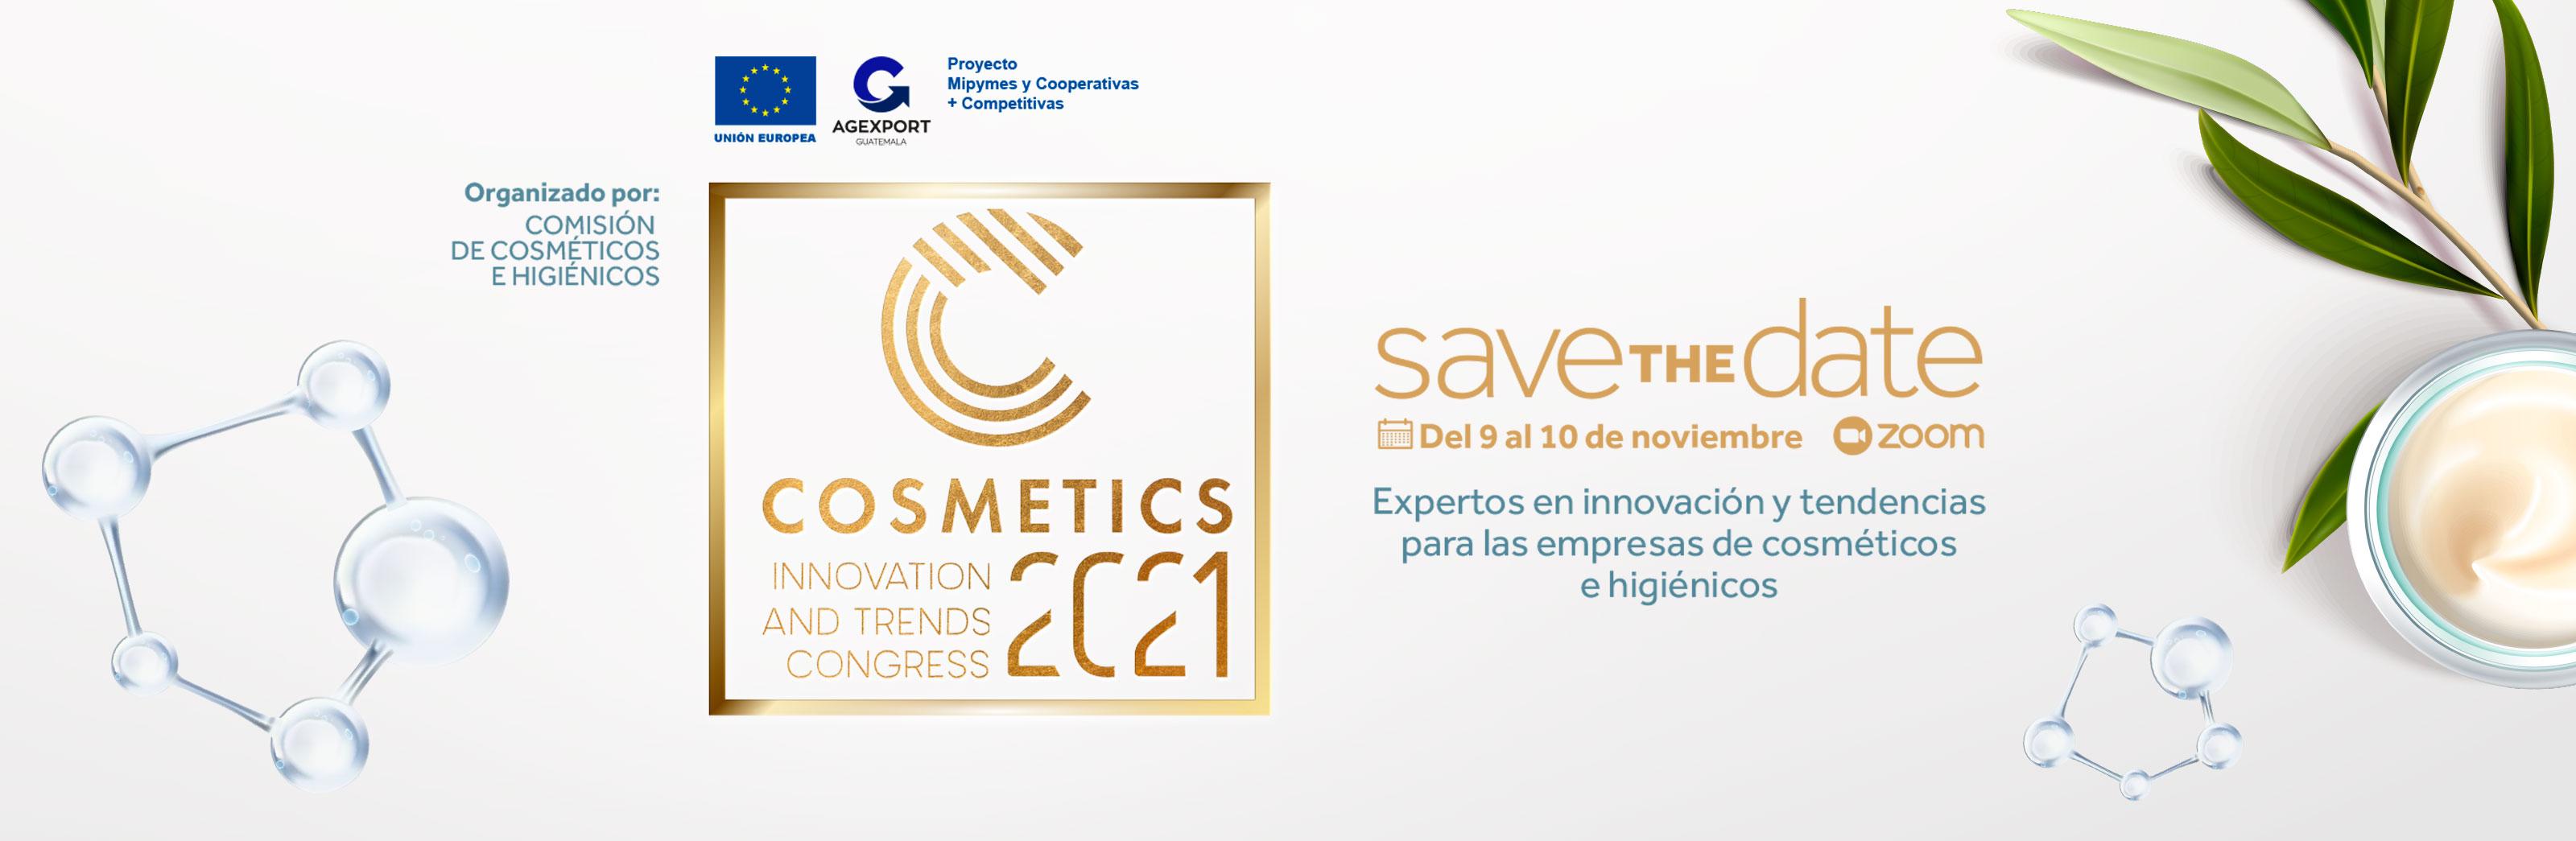 Cosmetics innovation and trends congress